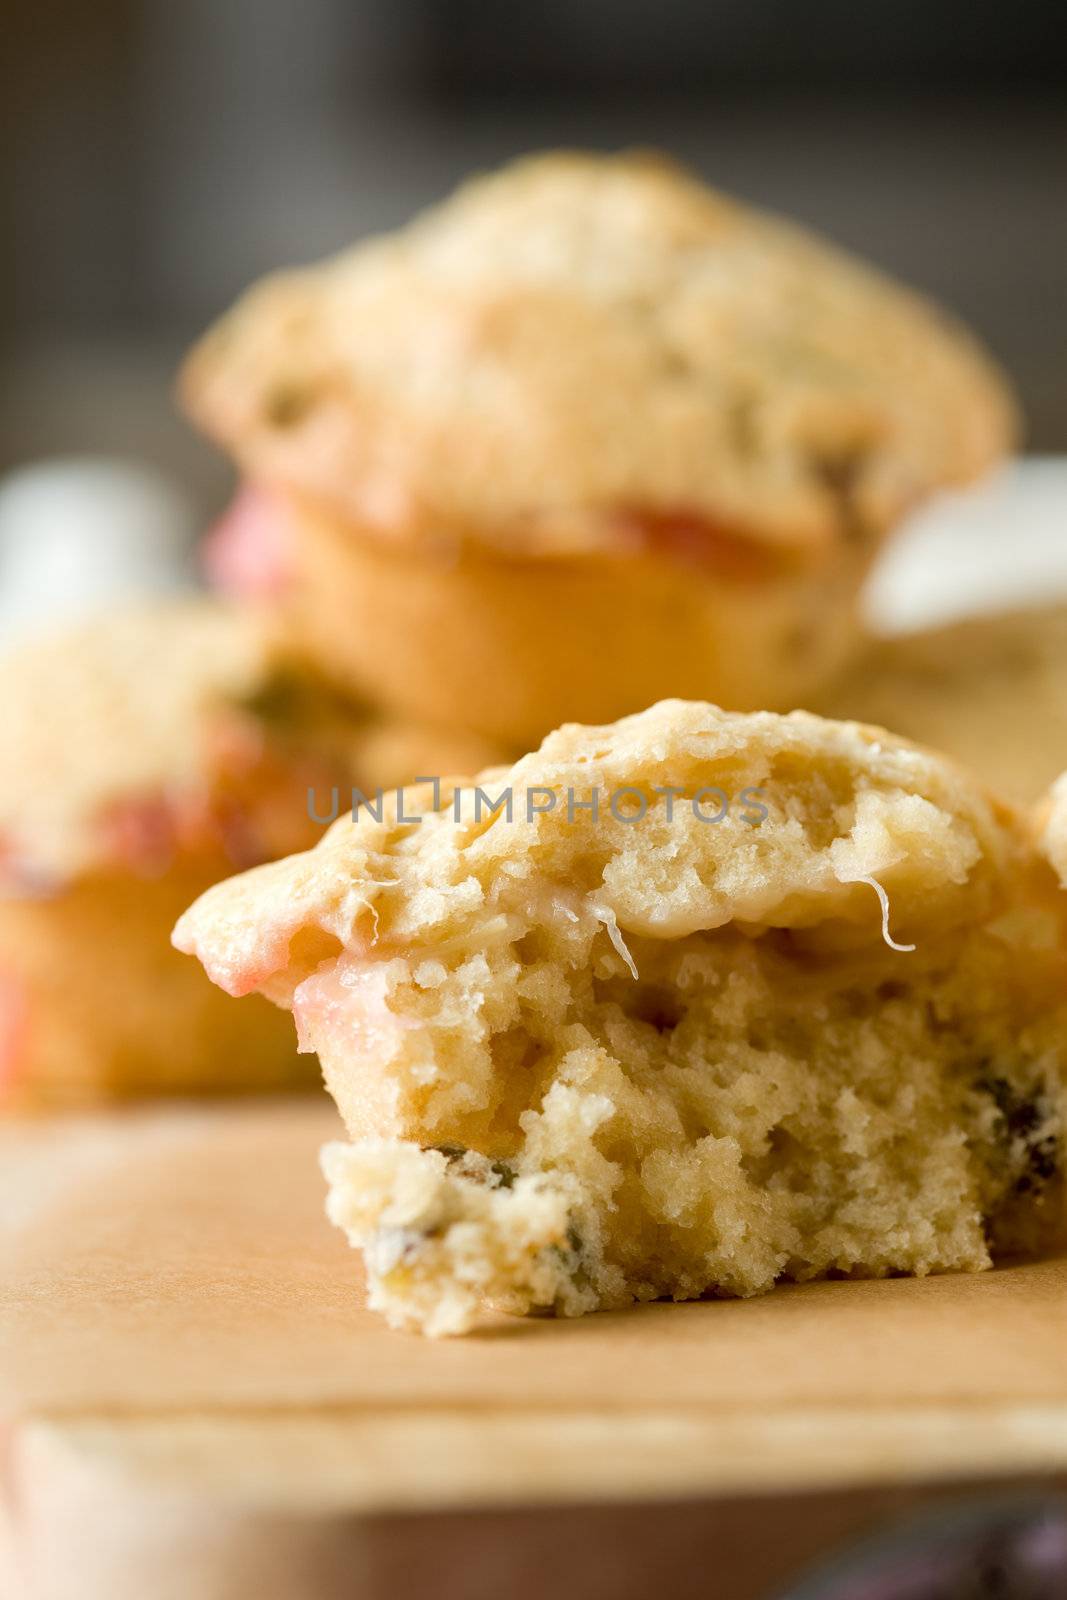 Delicious muffin with pistachio nuts and rhubarb